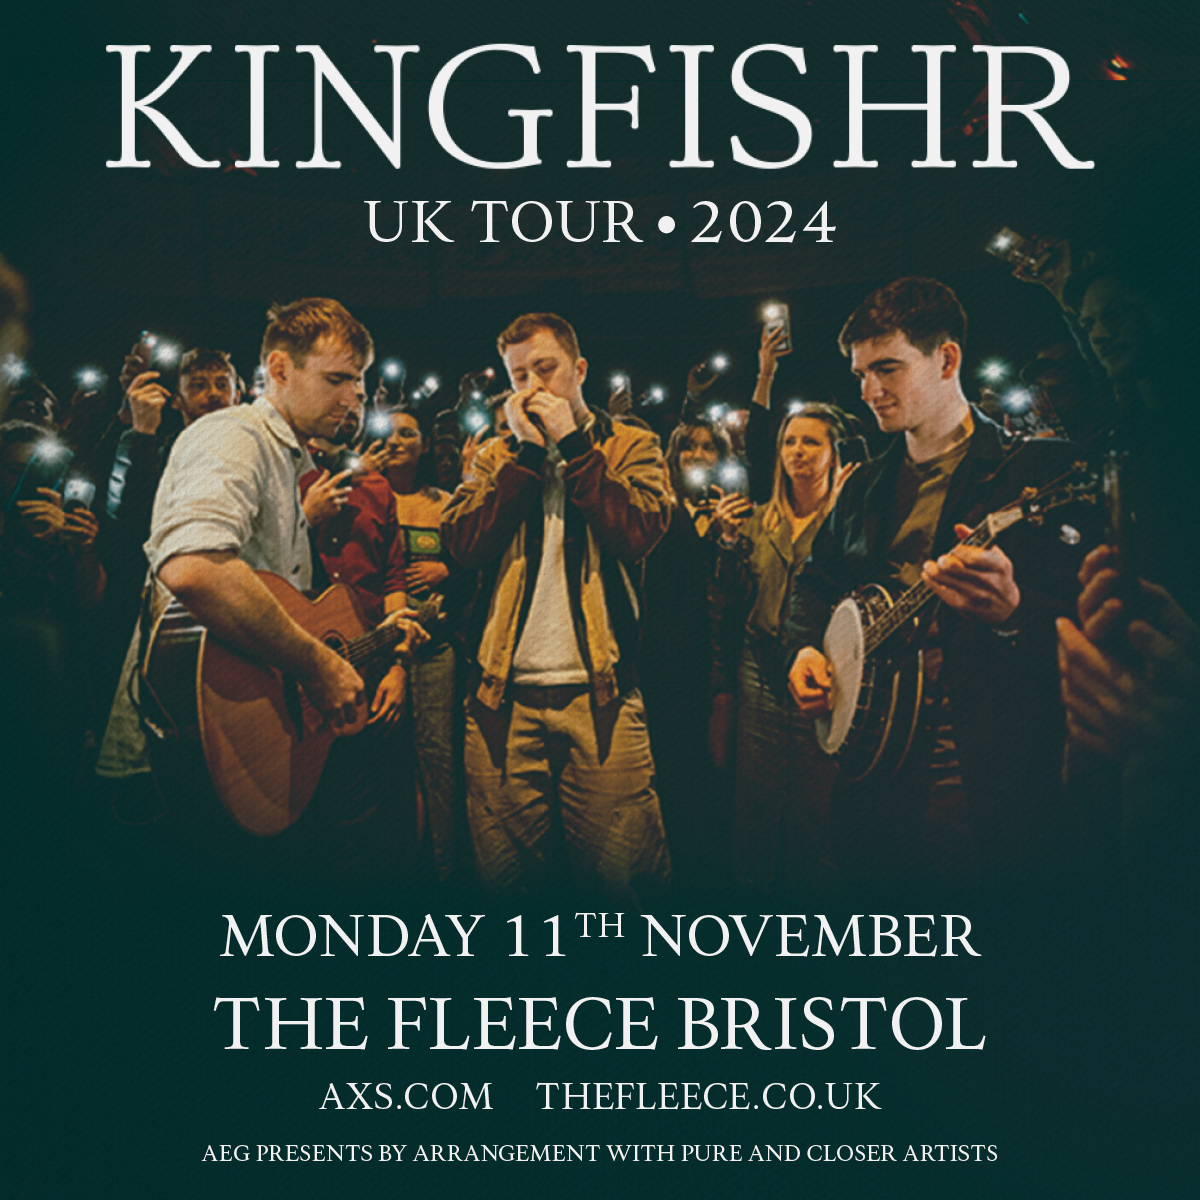 #AXSNEW 🎵✨ Rising Irish indie-folk trio @KingfishrBand have today announced a massive UK and Ireland headline tour for this autumn, with a stop at @FleeceBristol on 11th November! ⏰ Tickets are on sale Friday at 10am 🎫 w.axs.com/AROS50RkUAz